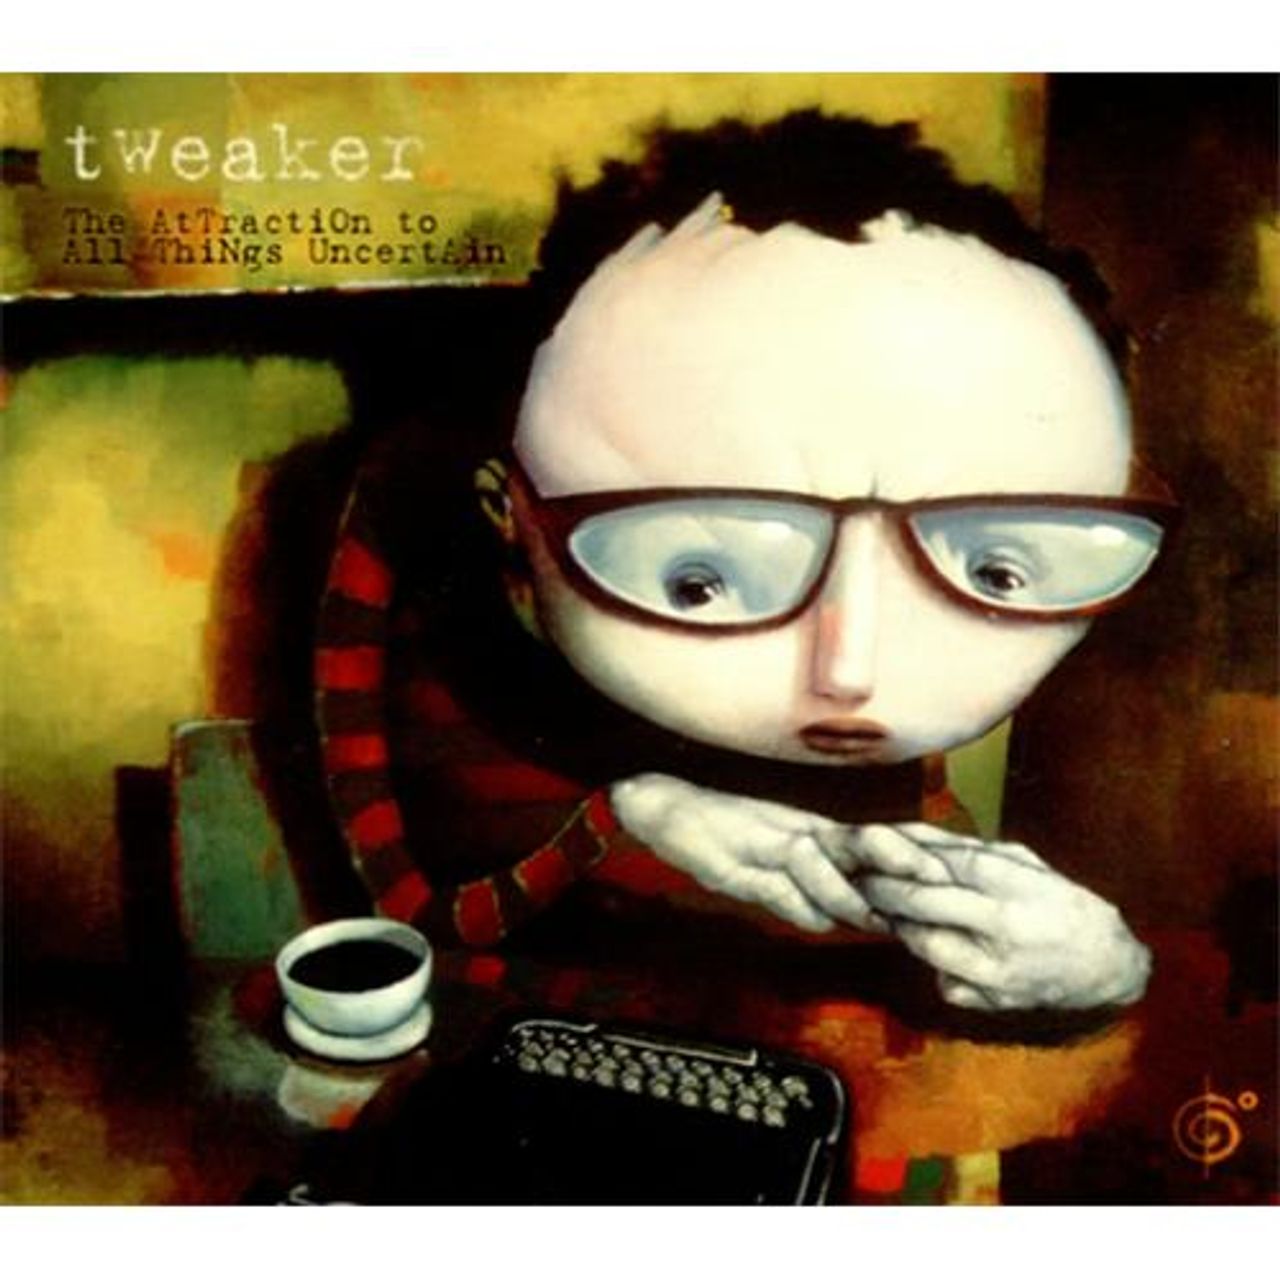 Tweaker The Attraction To All Things Uncertain US CD album (CDLP) 657036